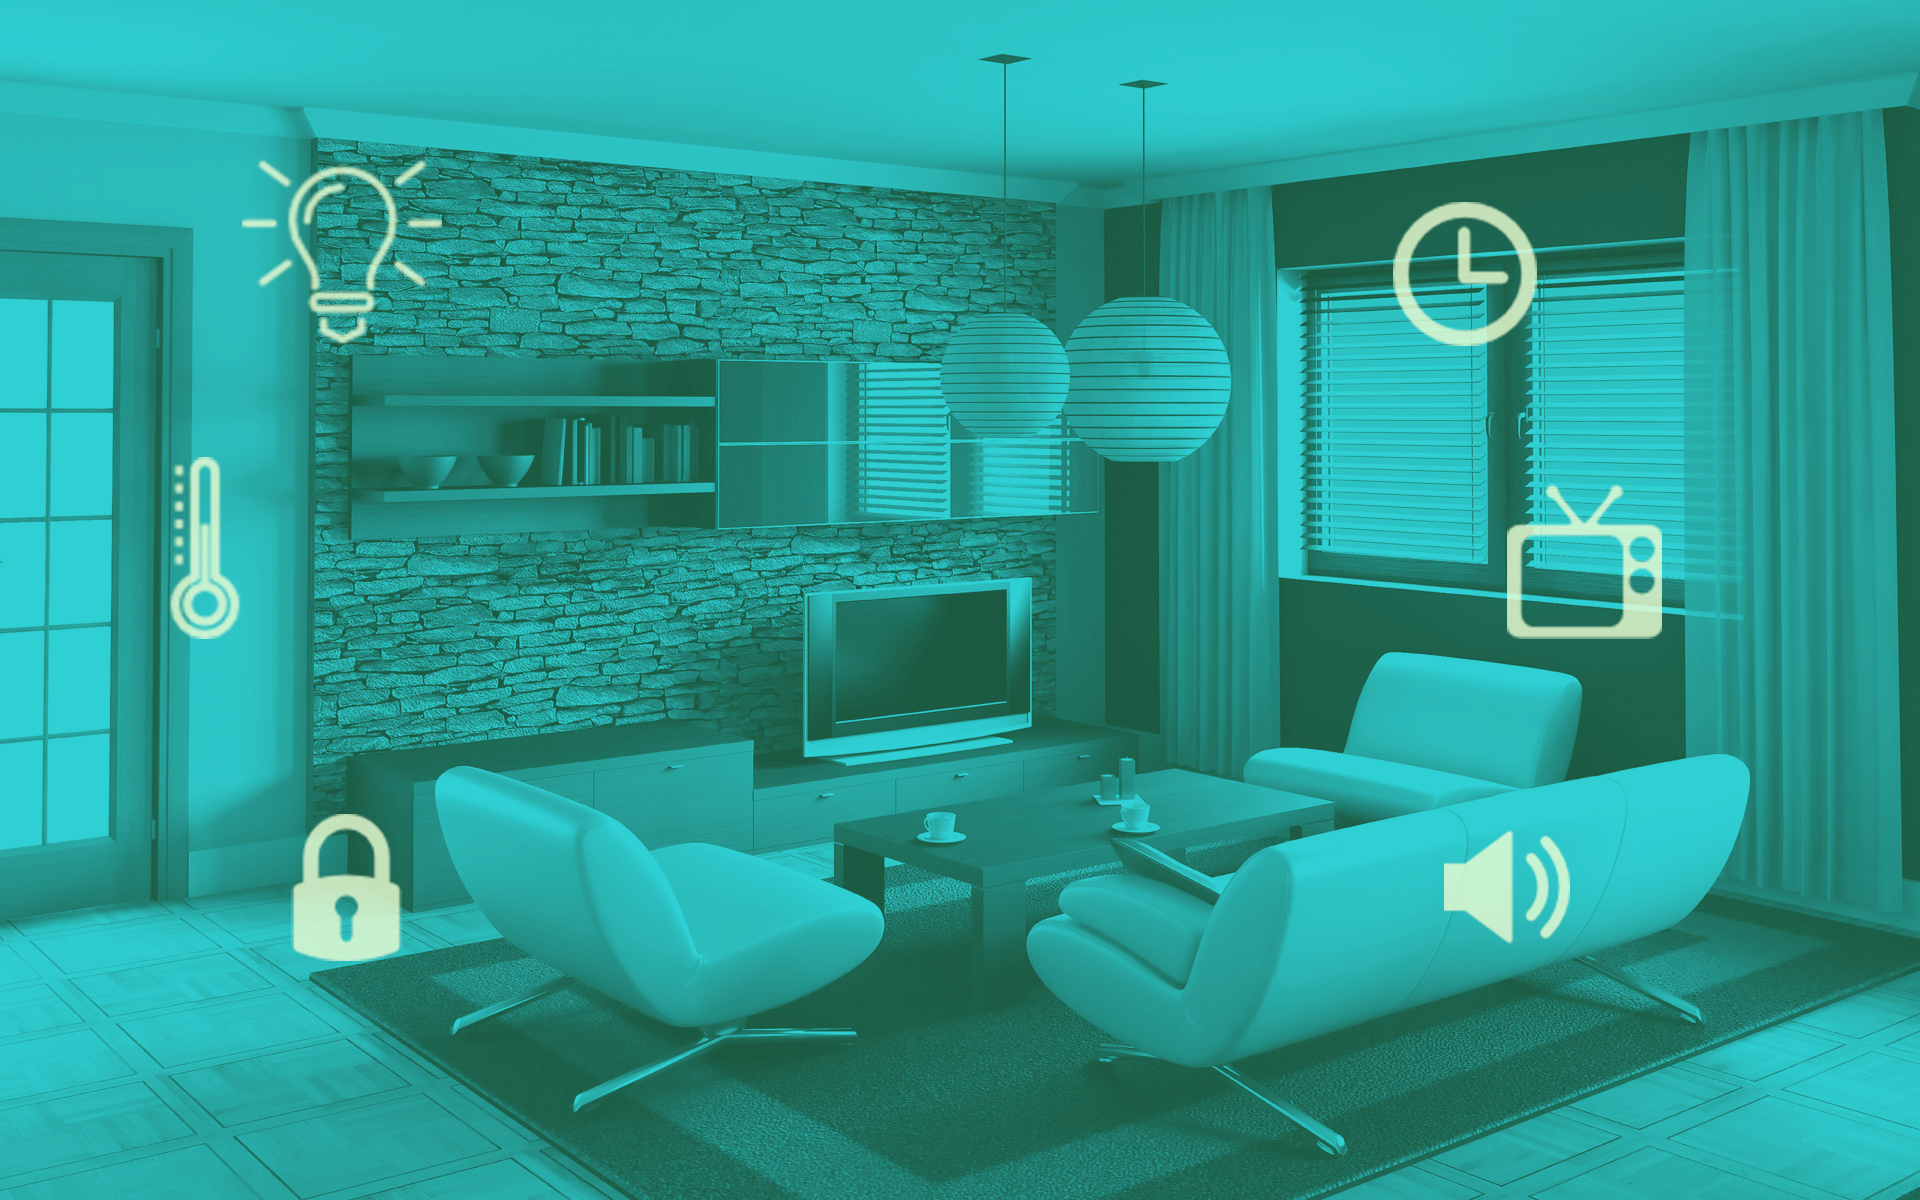 5 Home Automation Ideas With IoT-based Mobile Applications